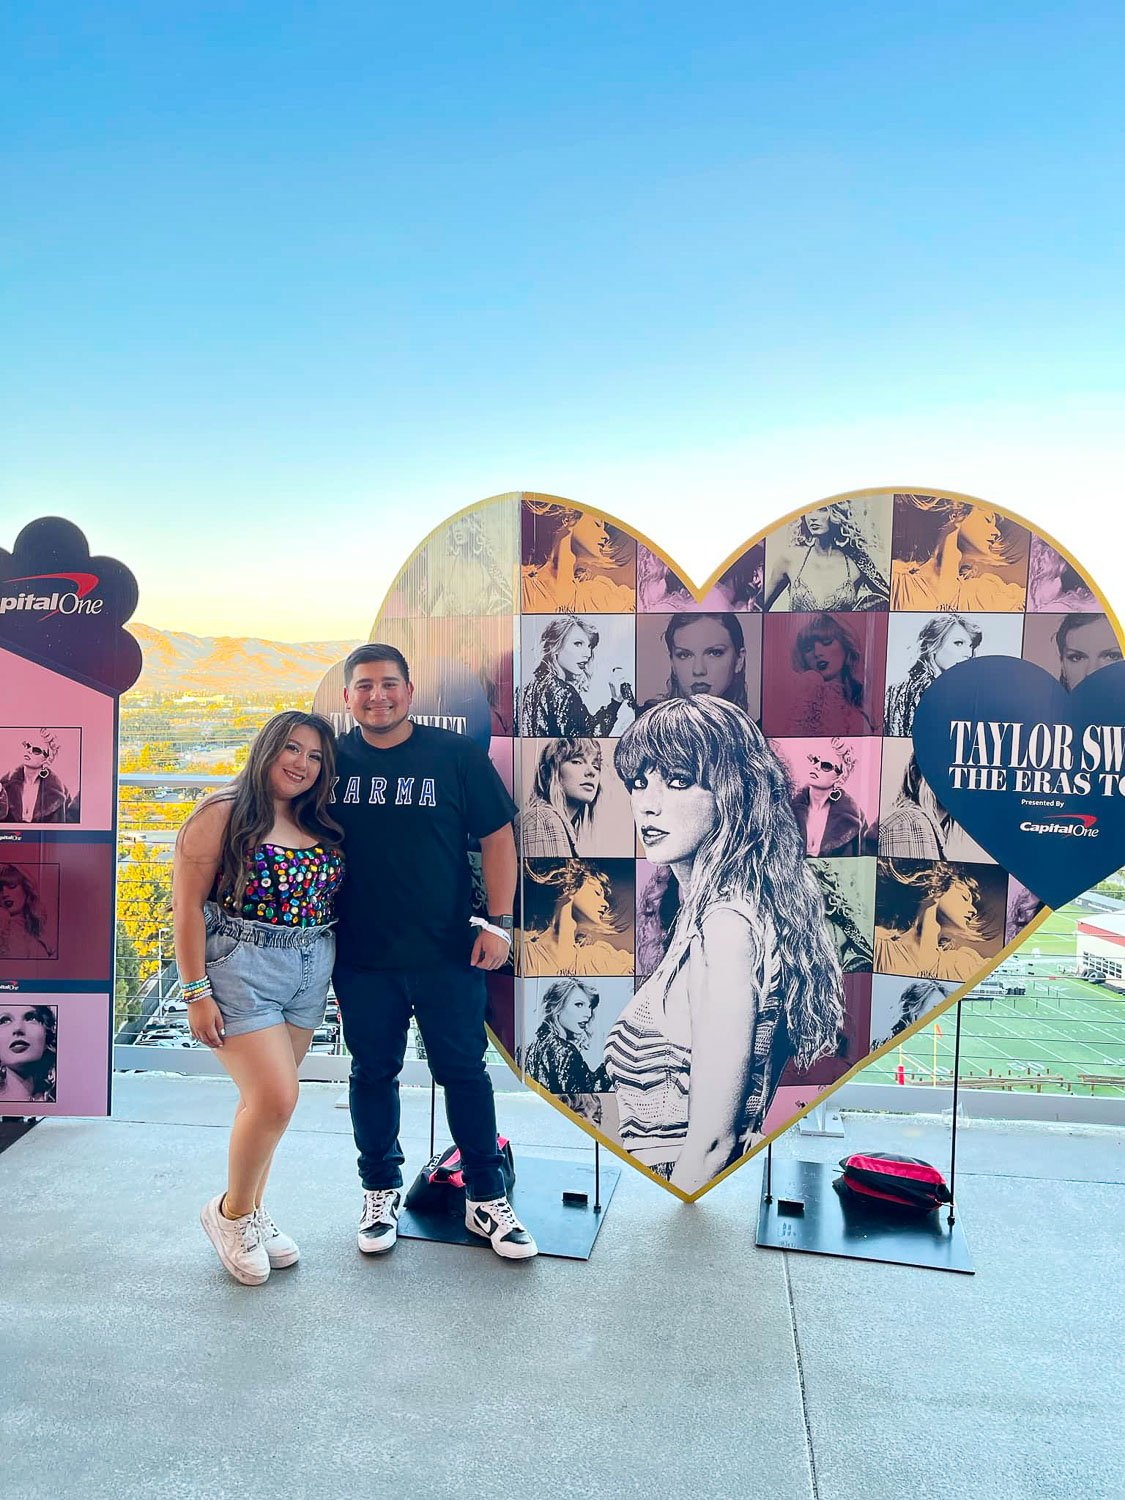 A young couple standing in front of heart shaped billboard